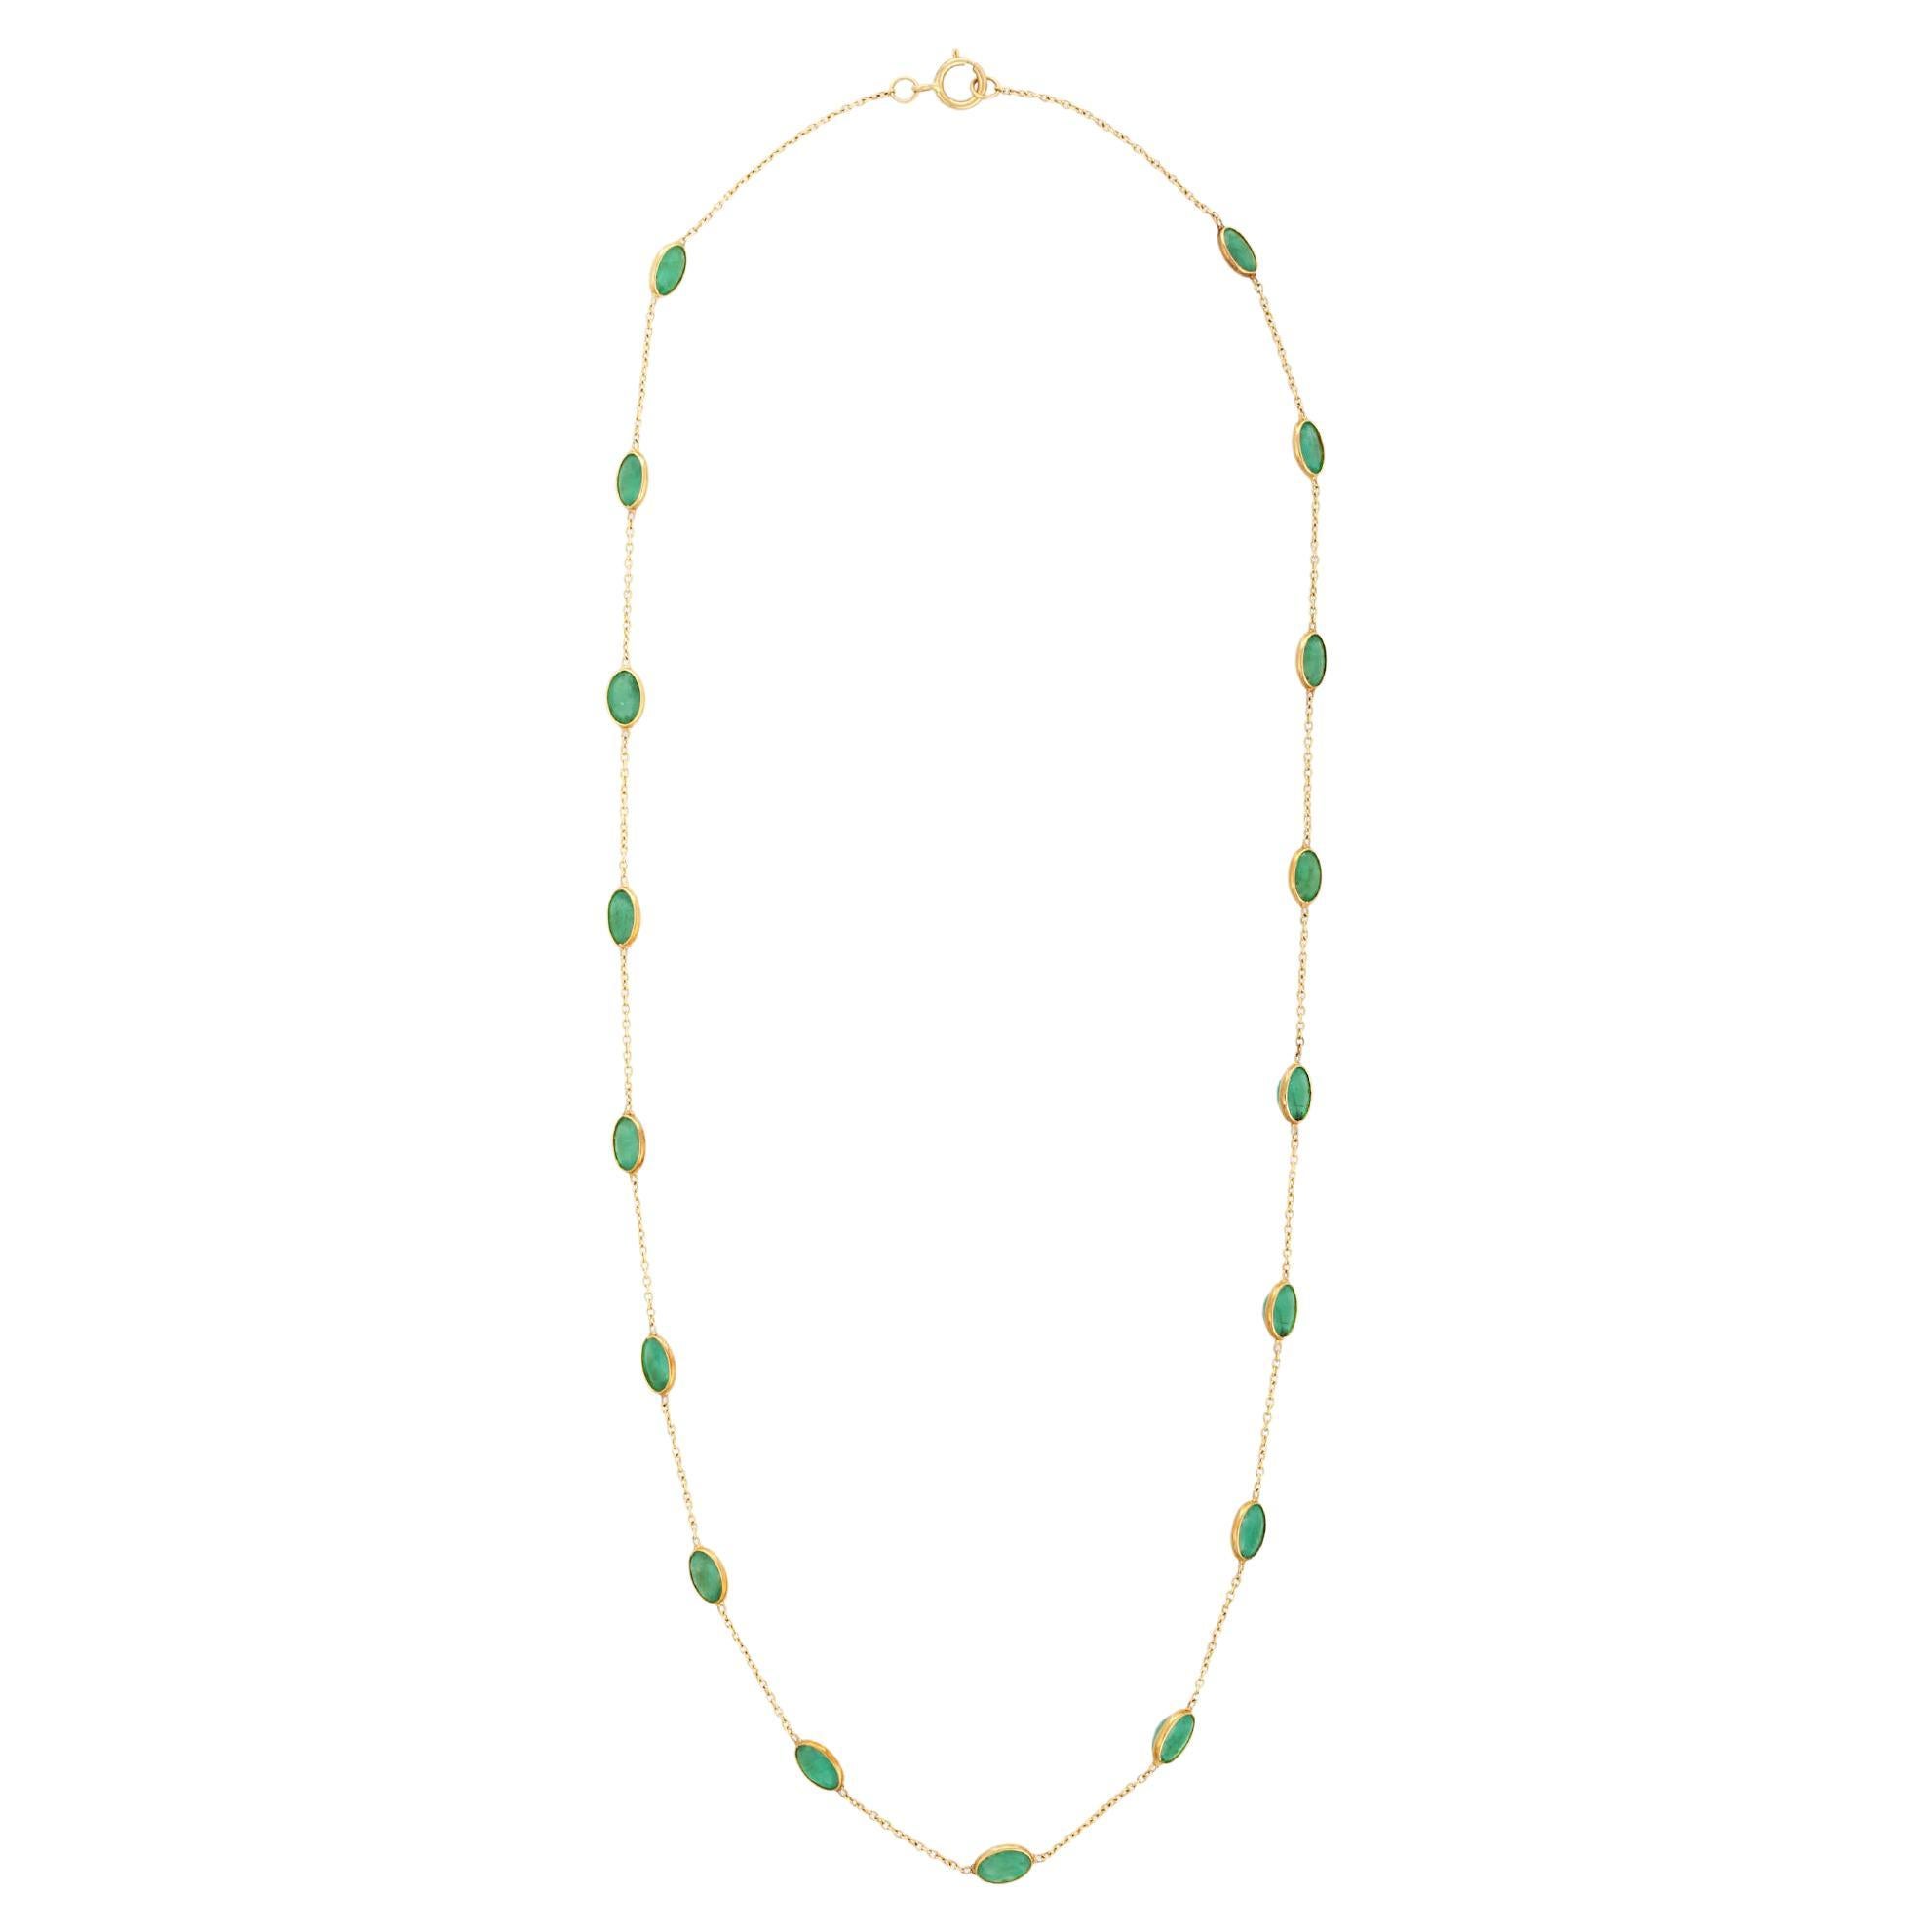 Modern 18K Yellow Gold Oval Cut 7.6 Ct Green Emerald Chain Necklace For Sale